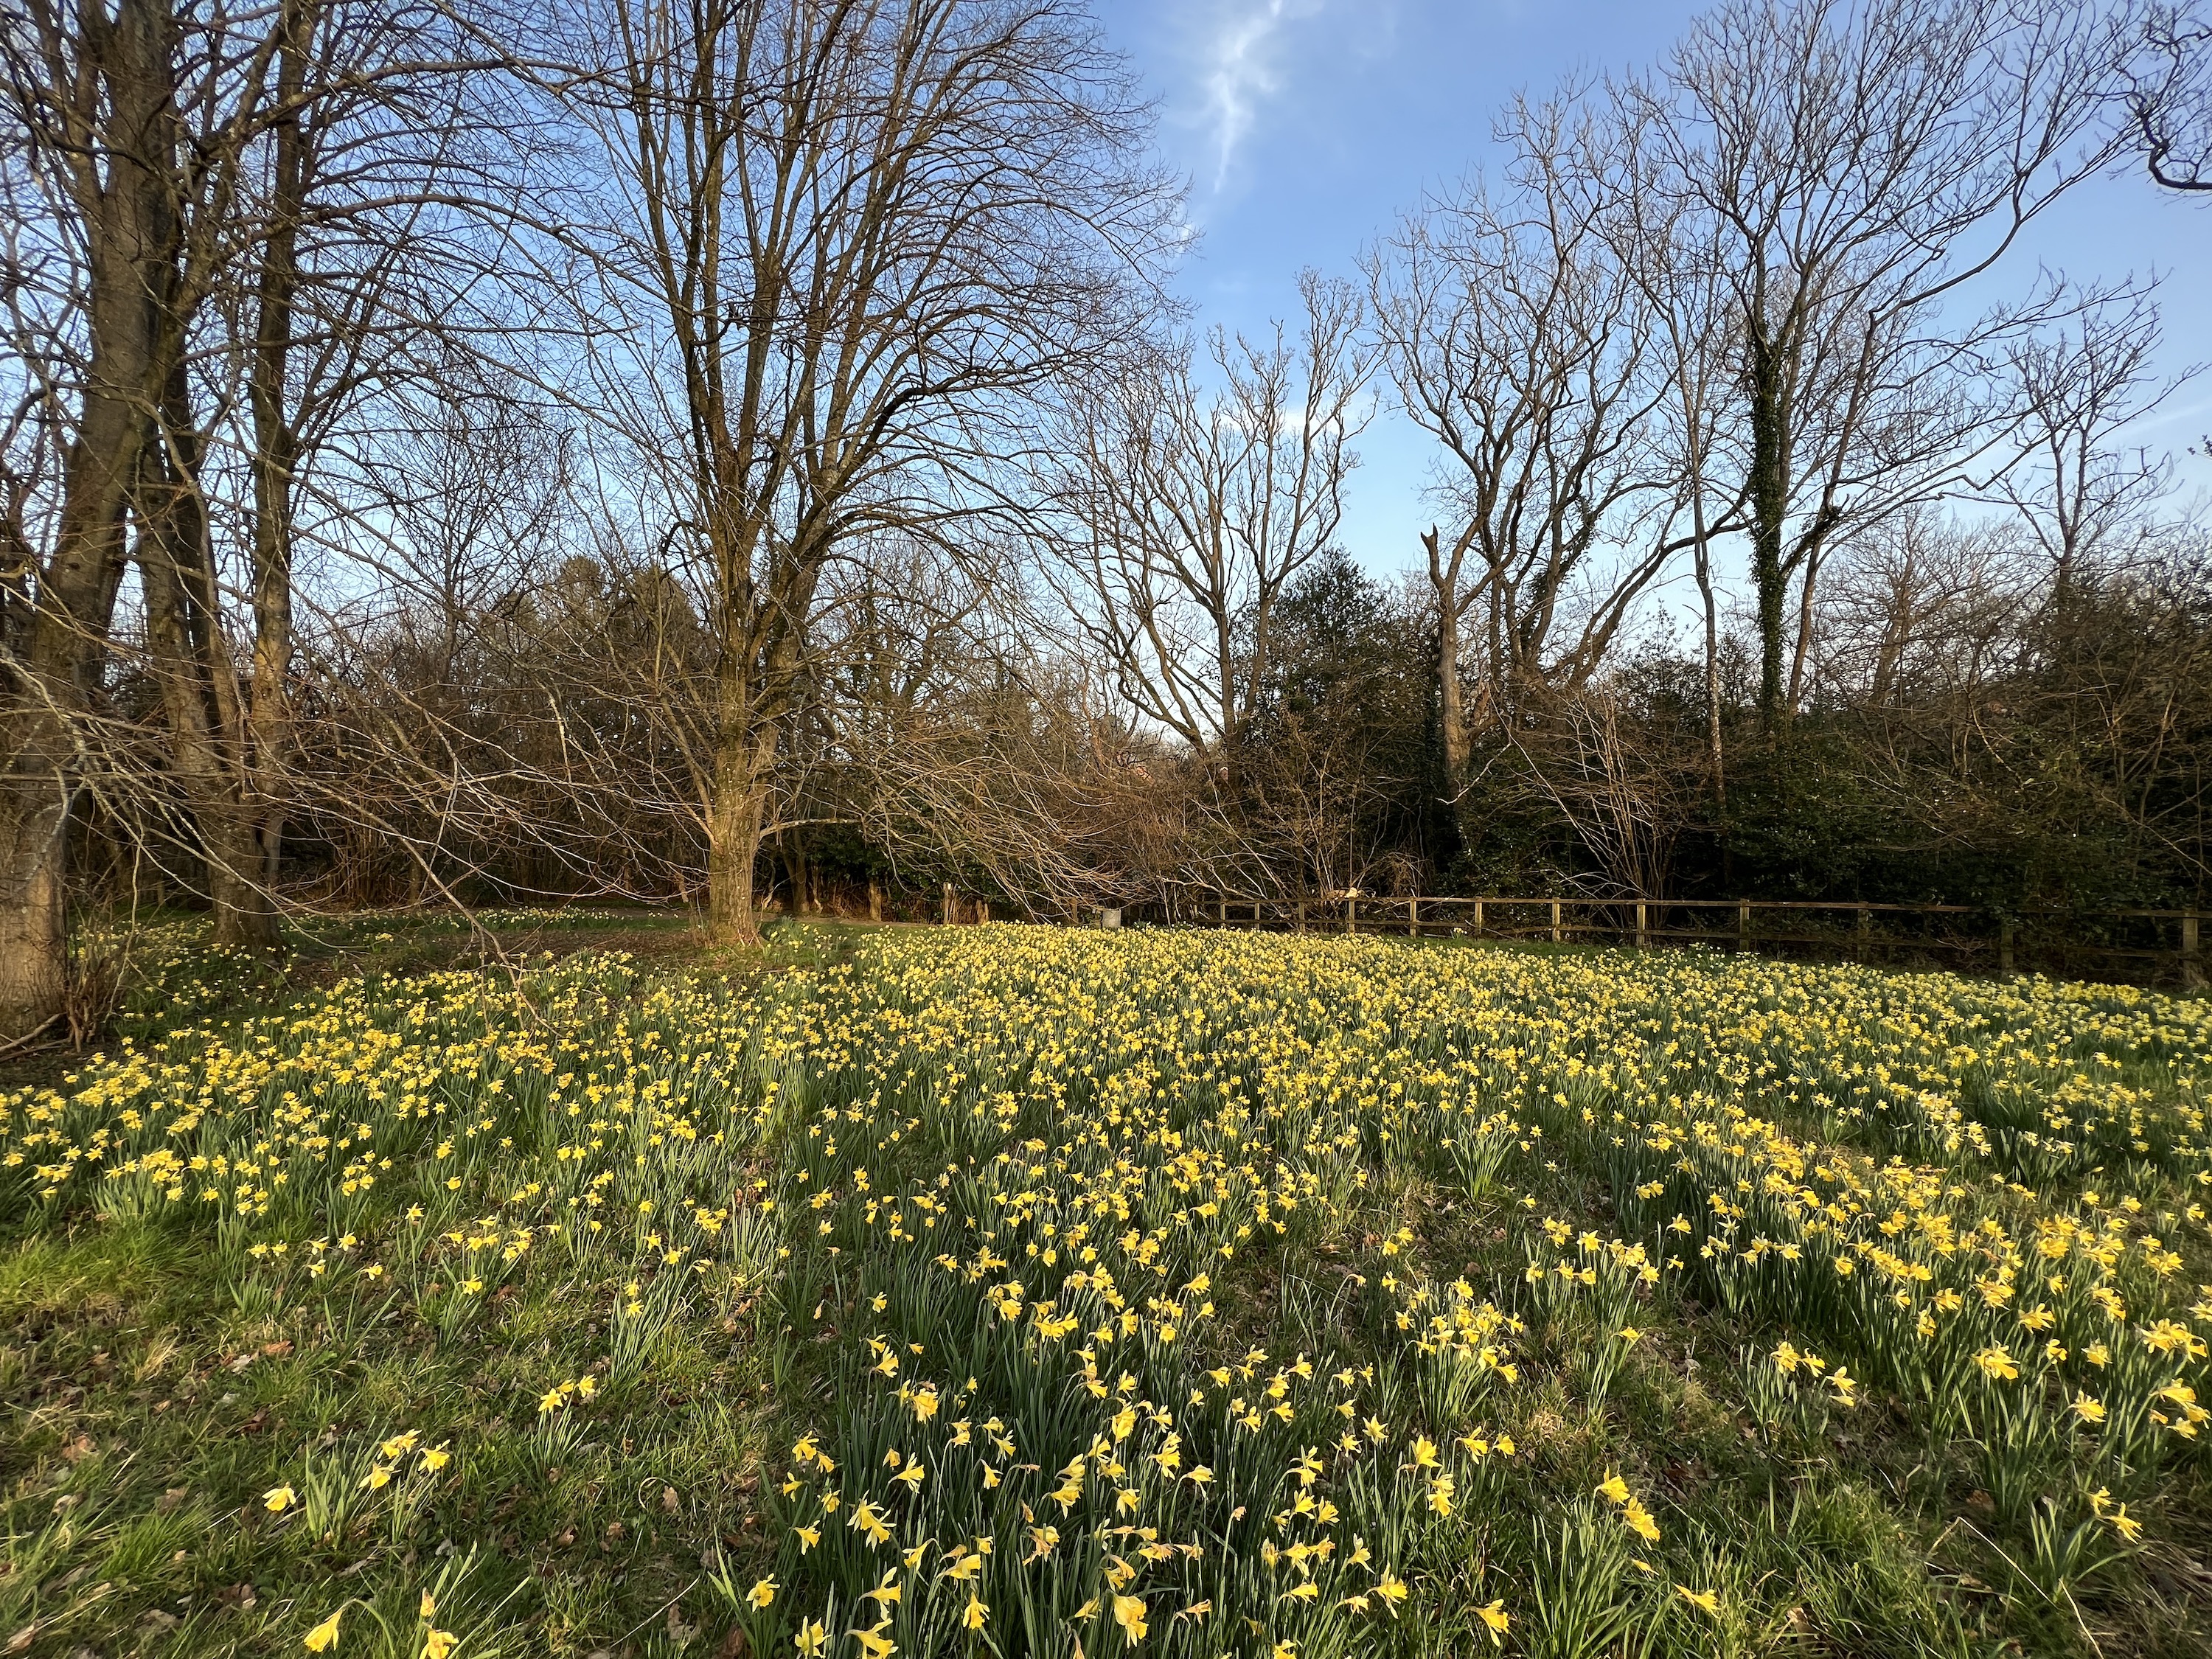 iPhone 13 Pro photo of daffodils, shot using the wide-angle camera.